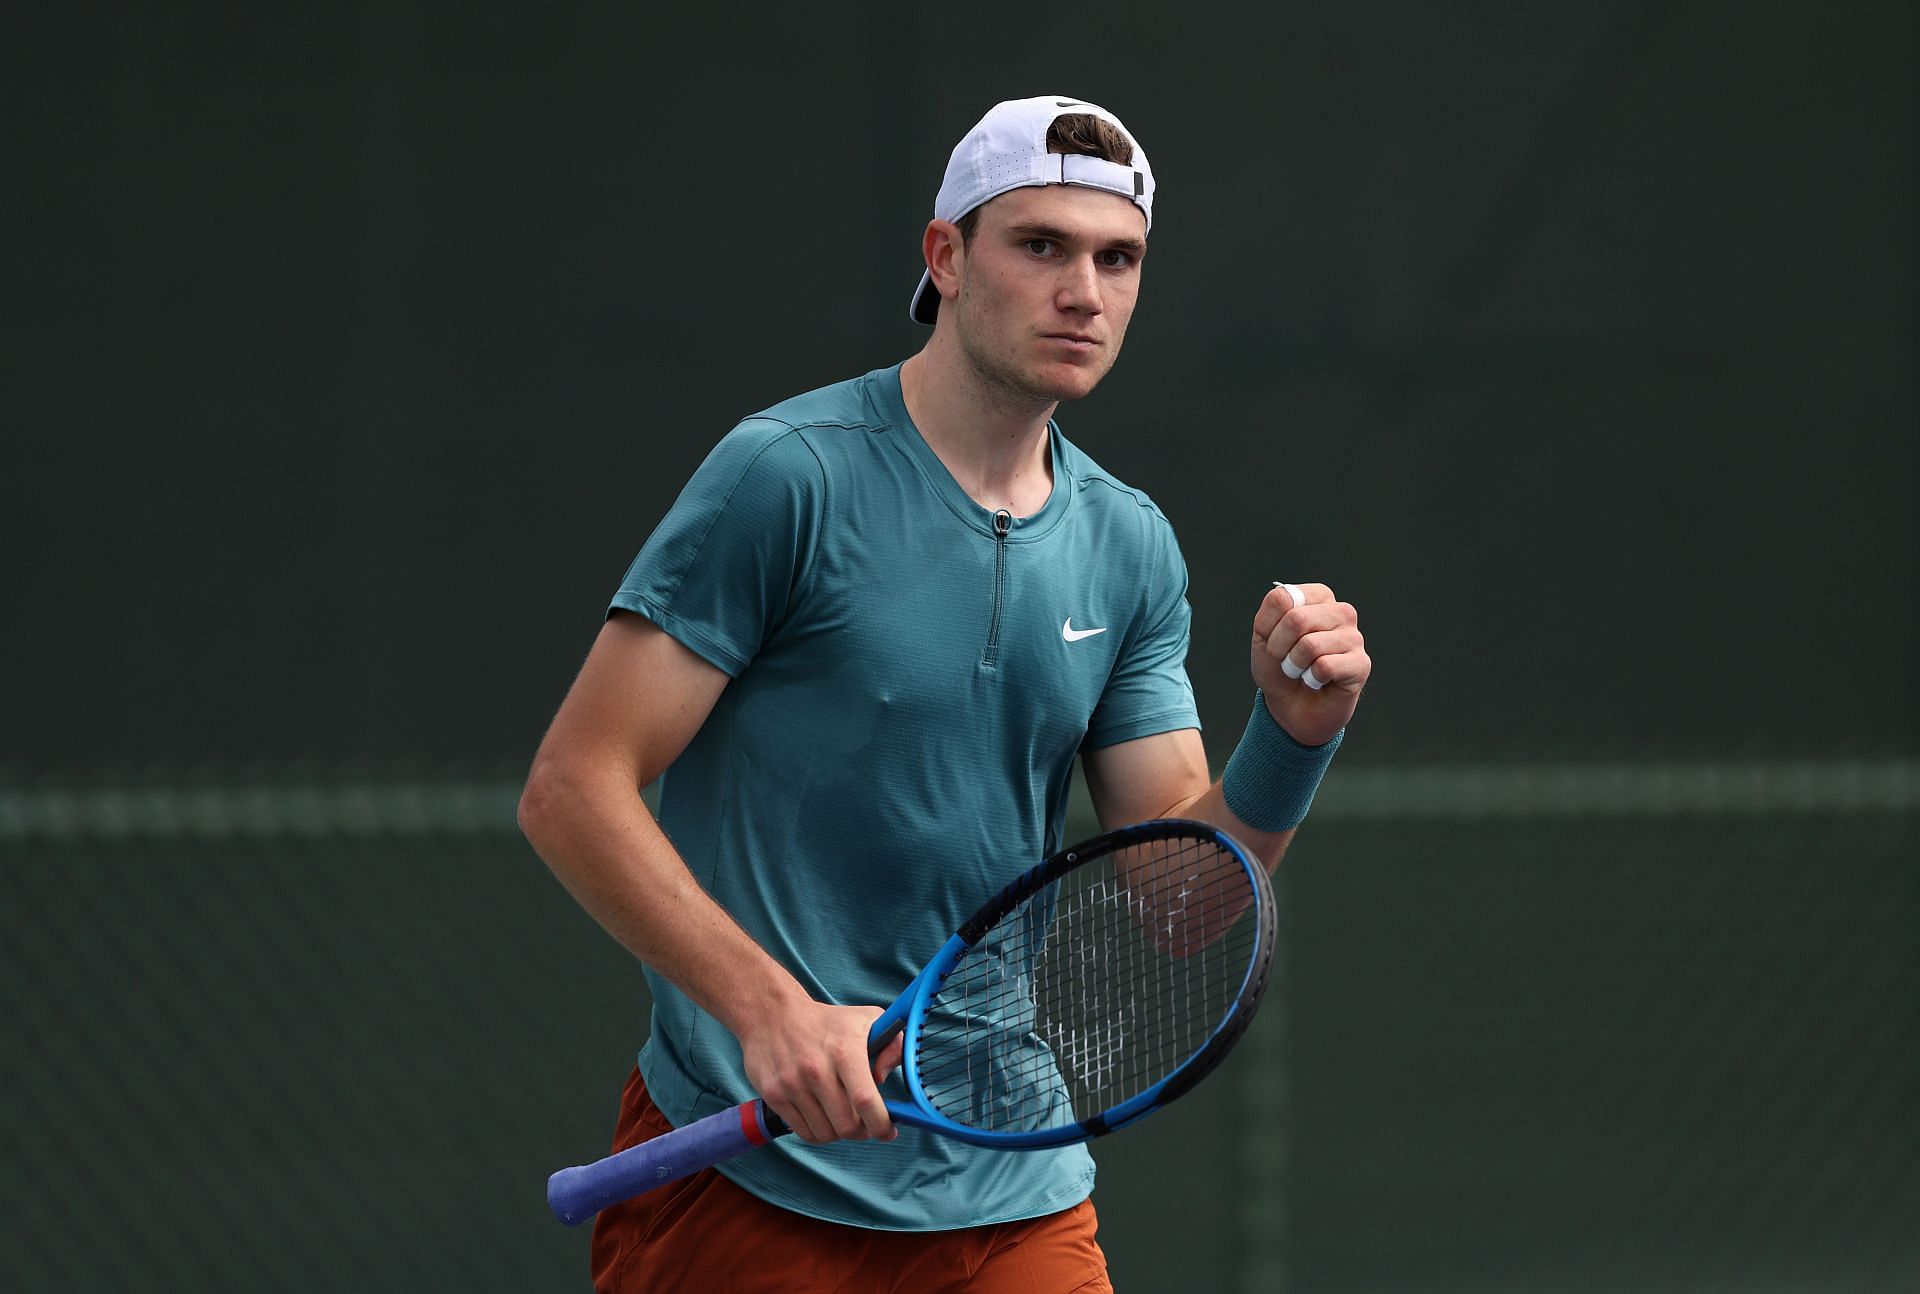 Jack Draper beat Andy Murray for the first time in his career at 2023 Indian Wells.